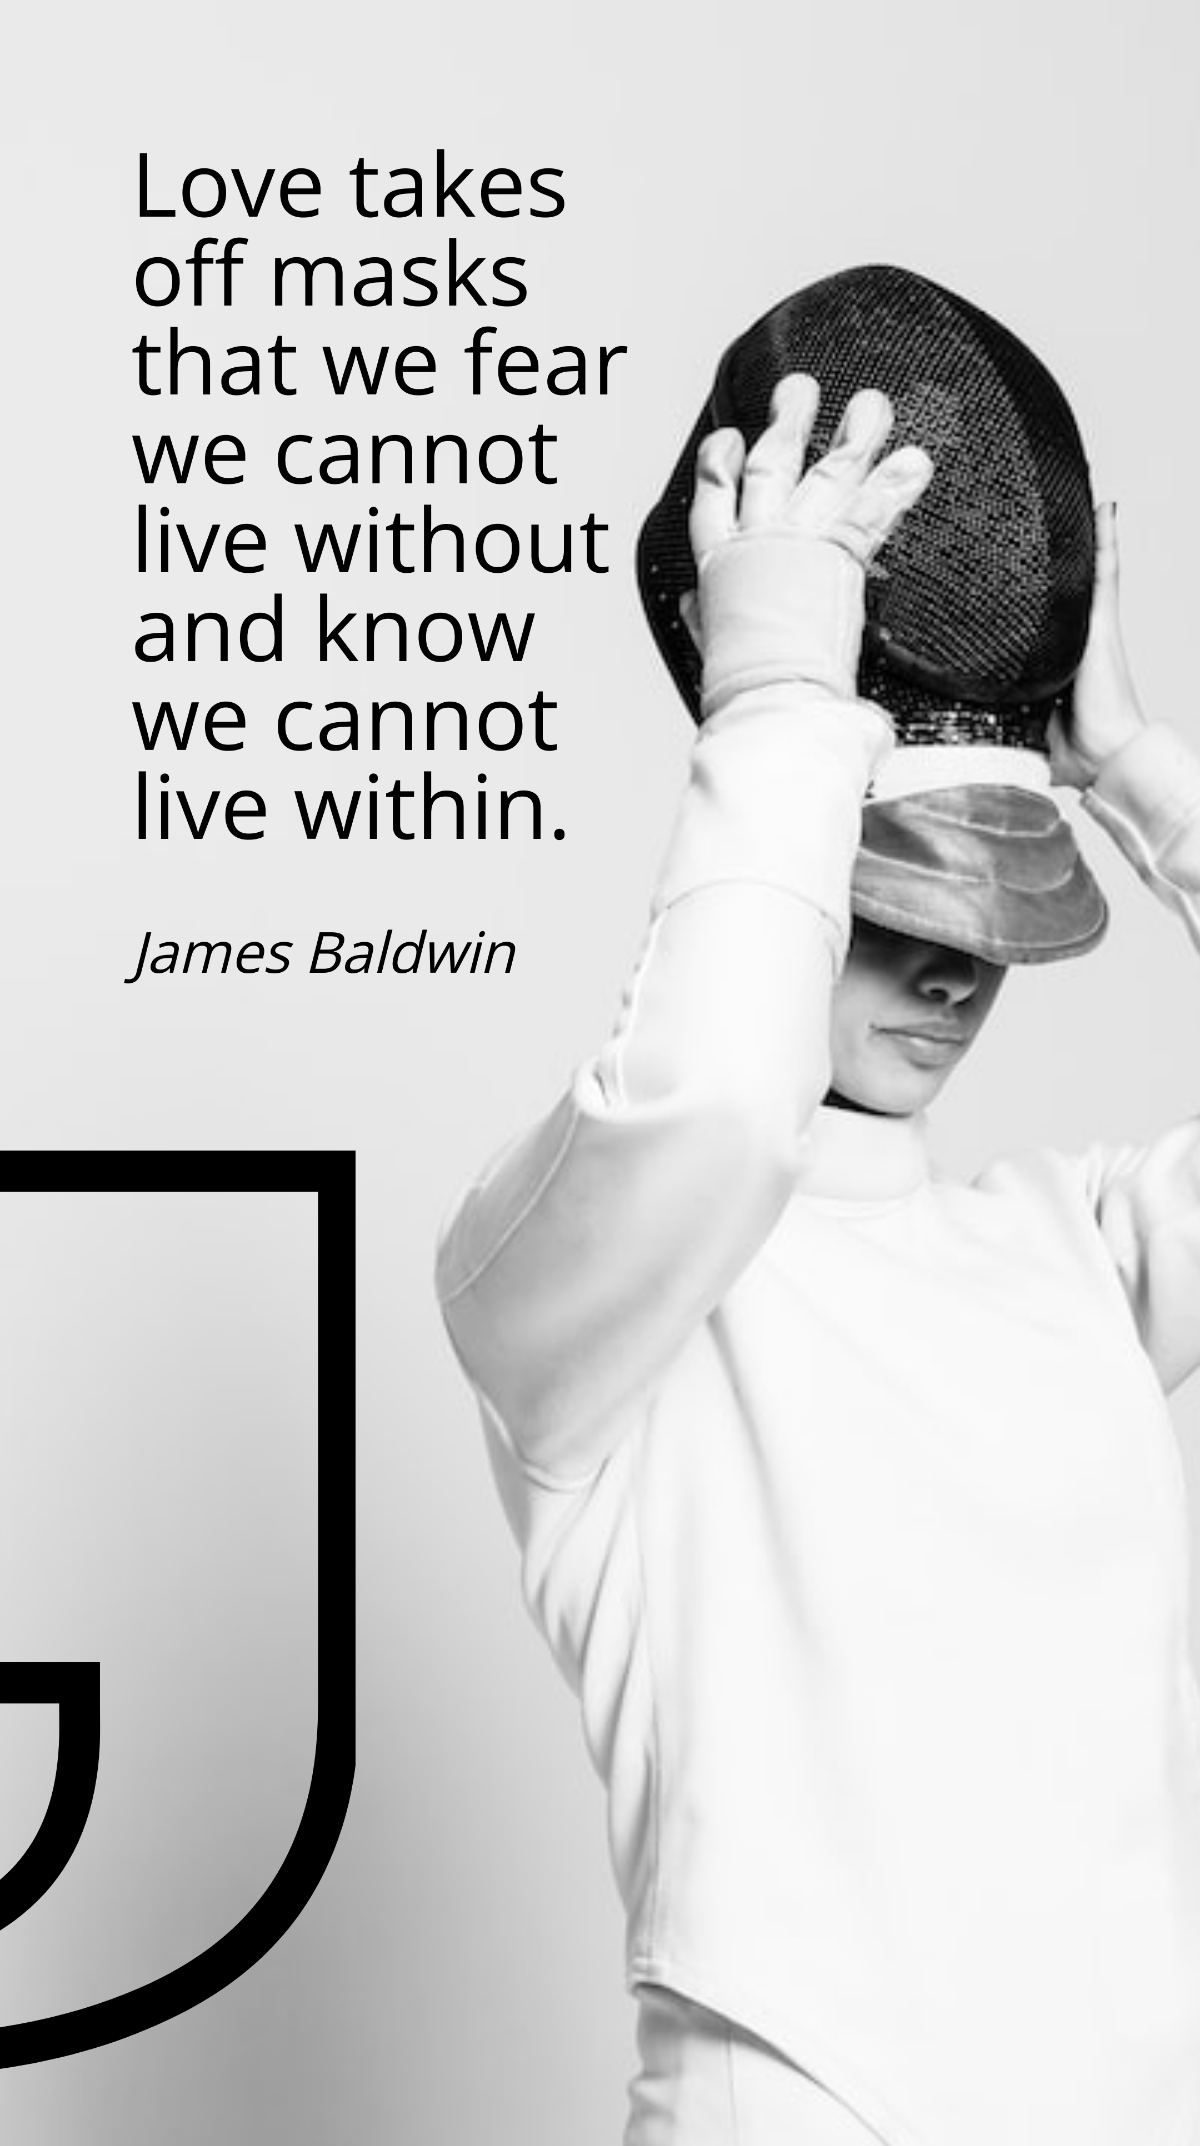 James Baldwin - Love takes off masks that we fear we cannot live without and know we cannot live within. Template